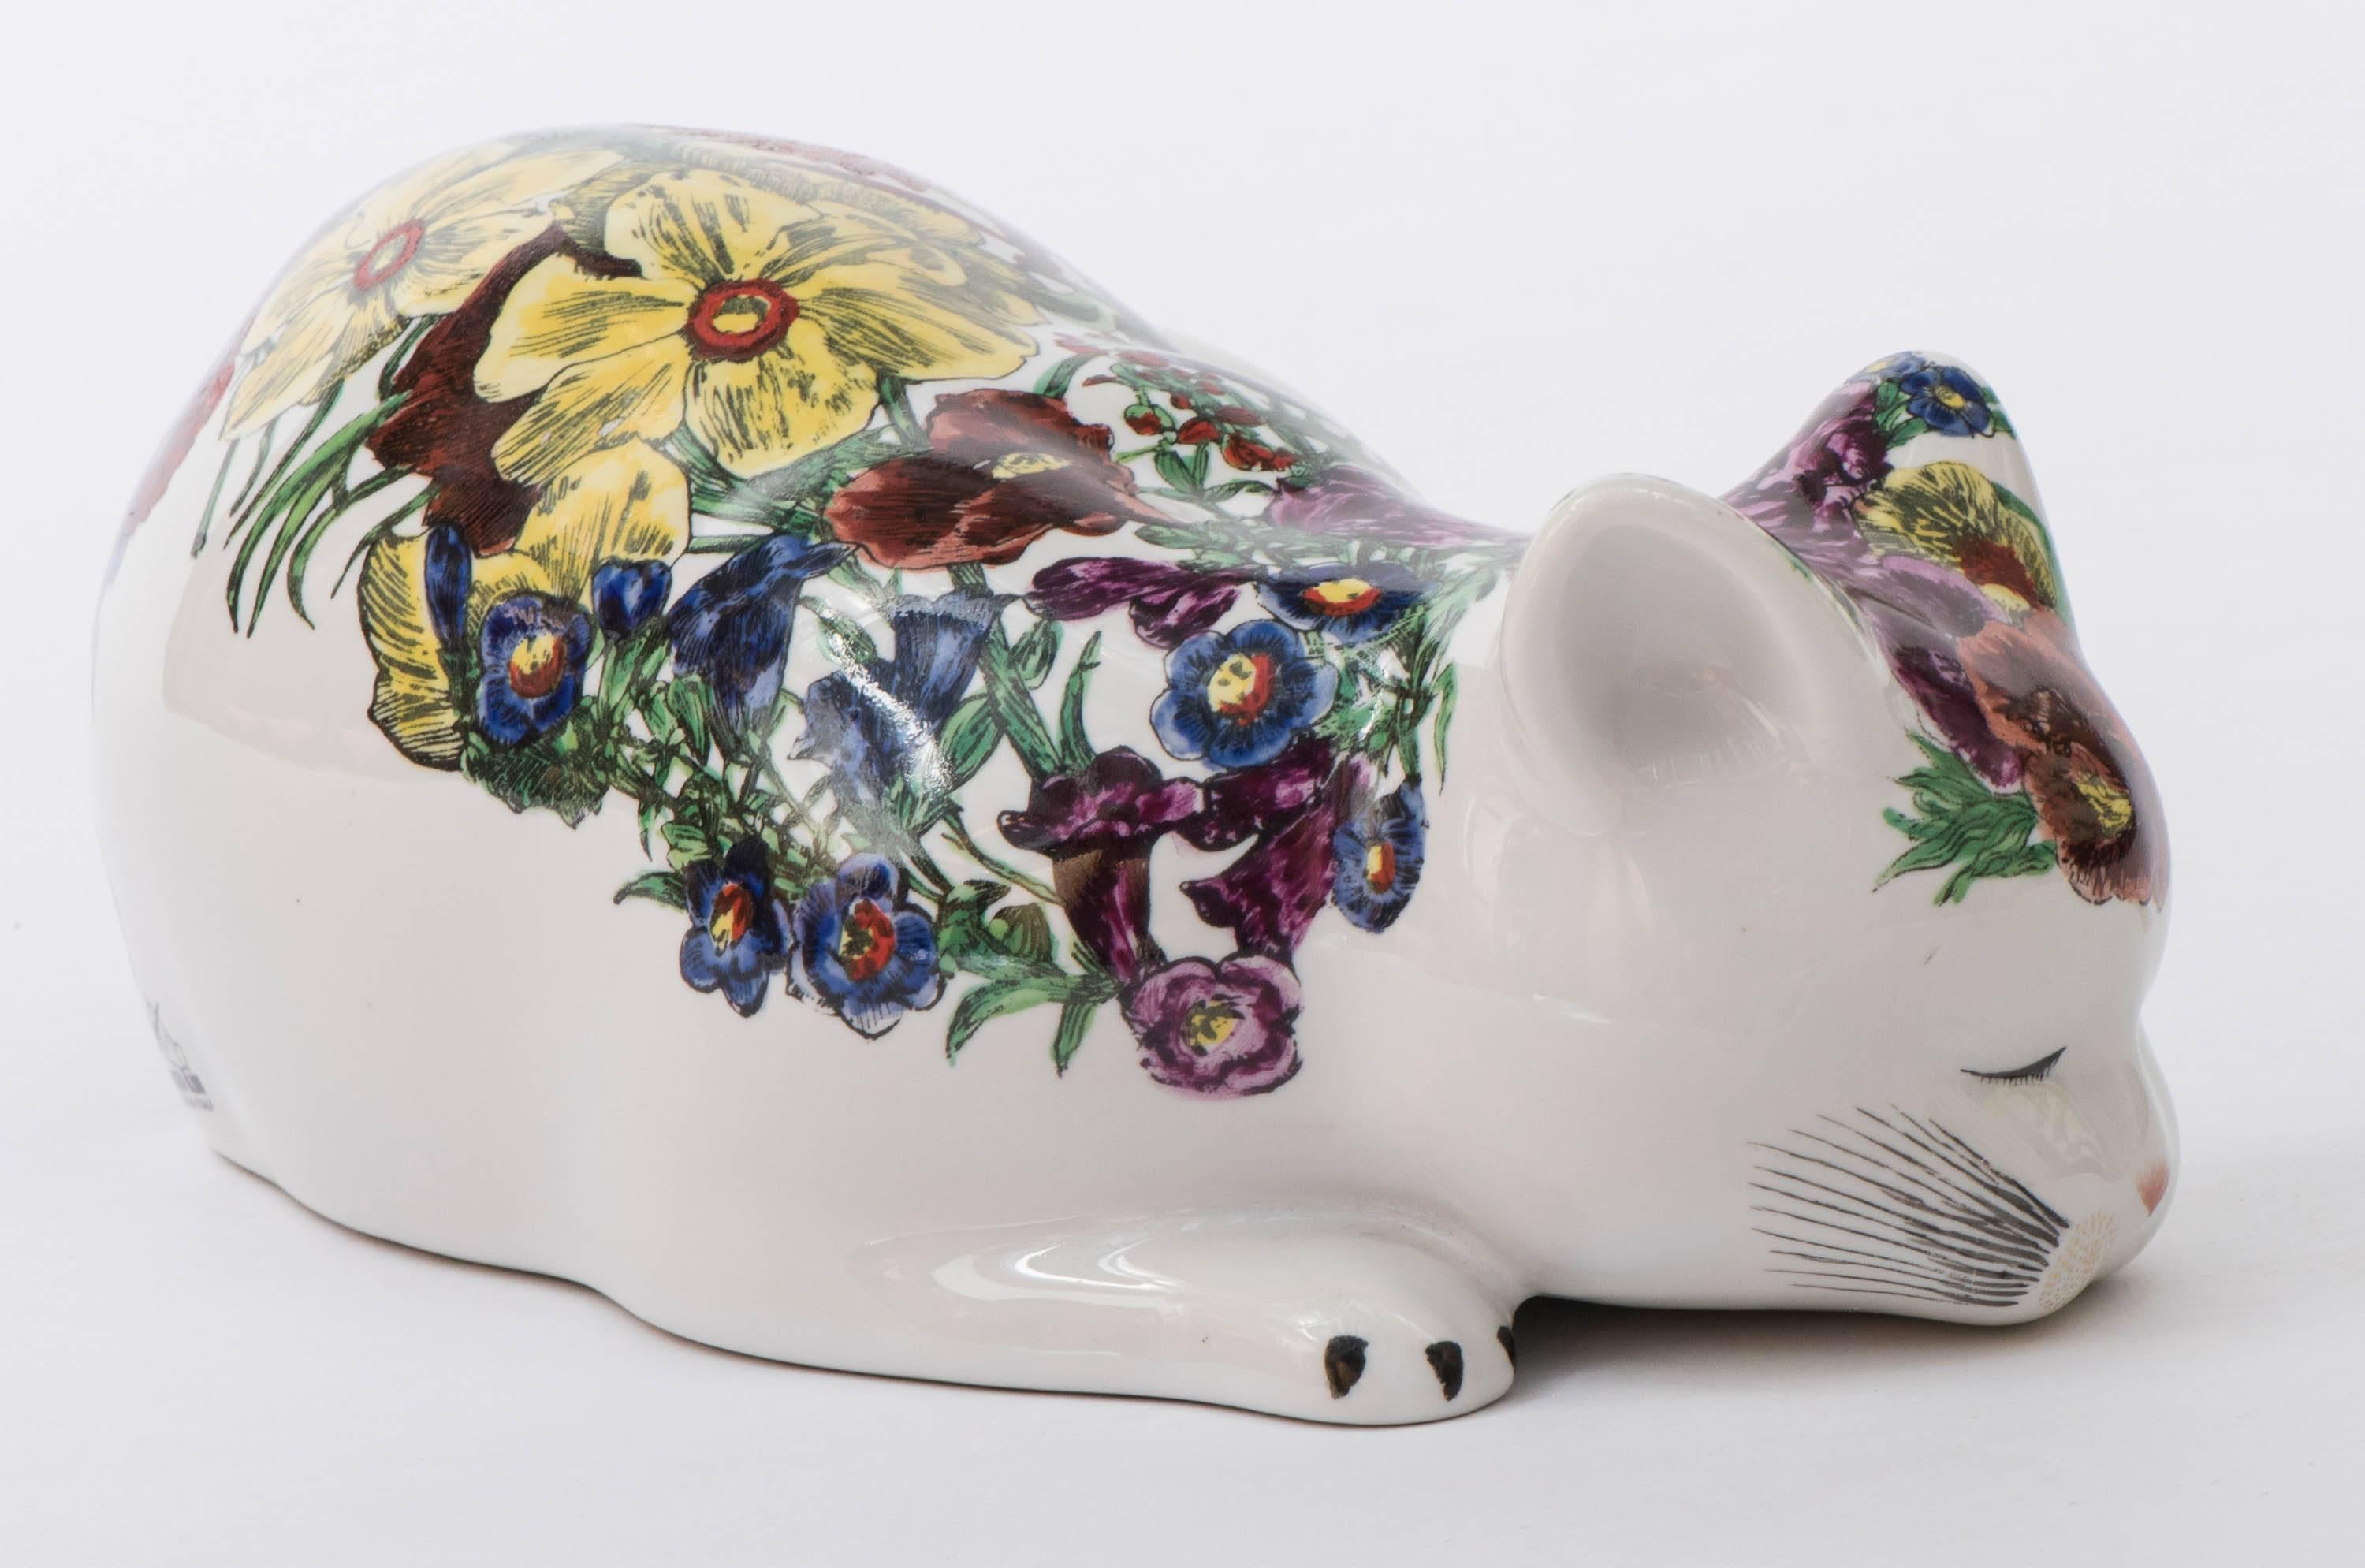 Sleeping porcelain cat by Piero Fornasetti.
“Gatto avvocacciato florata”
Lithographically printed and hand-colored. 
Painted with flora and foliage.
Italy, circa 1960.
Marked to base.
Measures: 12.5 cm high x 31 cm wide x 18 cm deep.
  